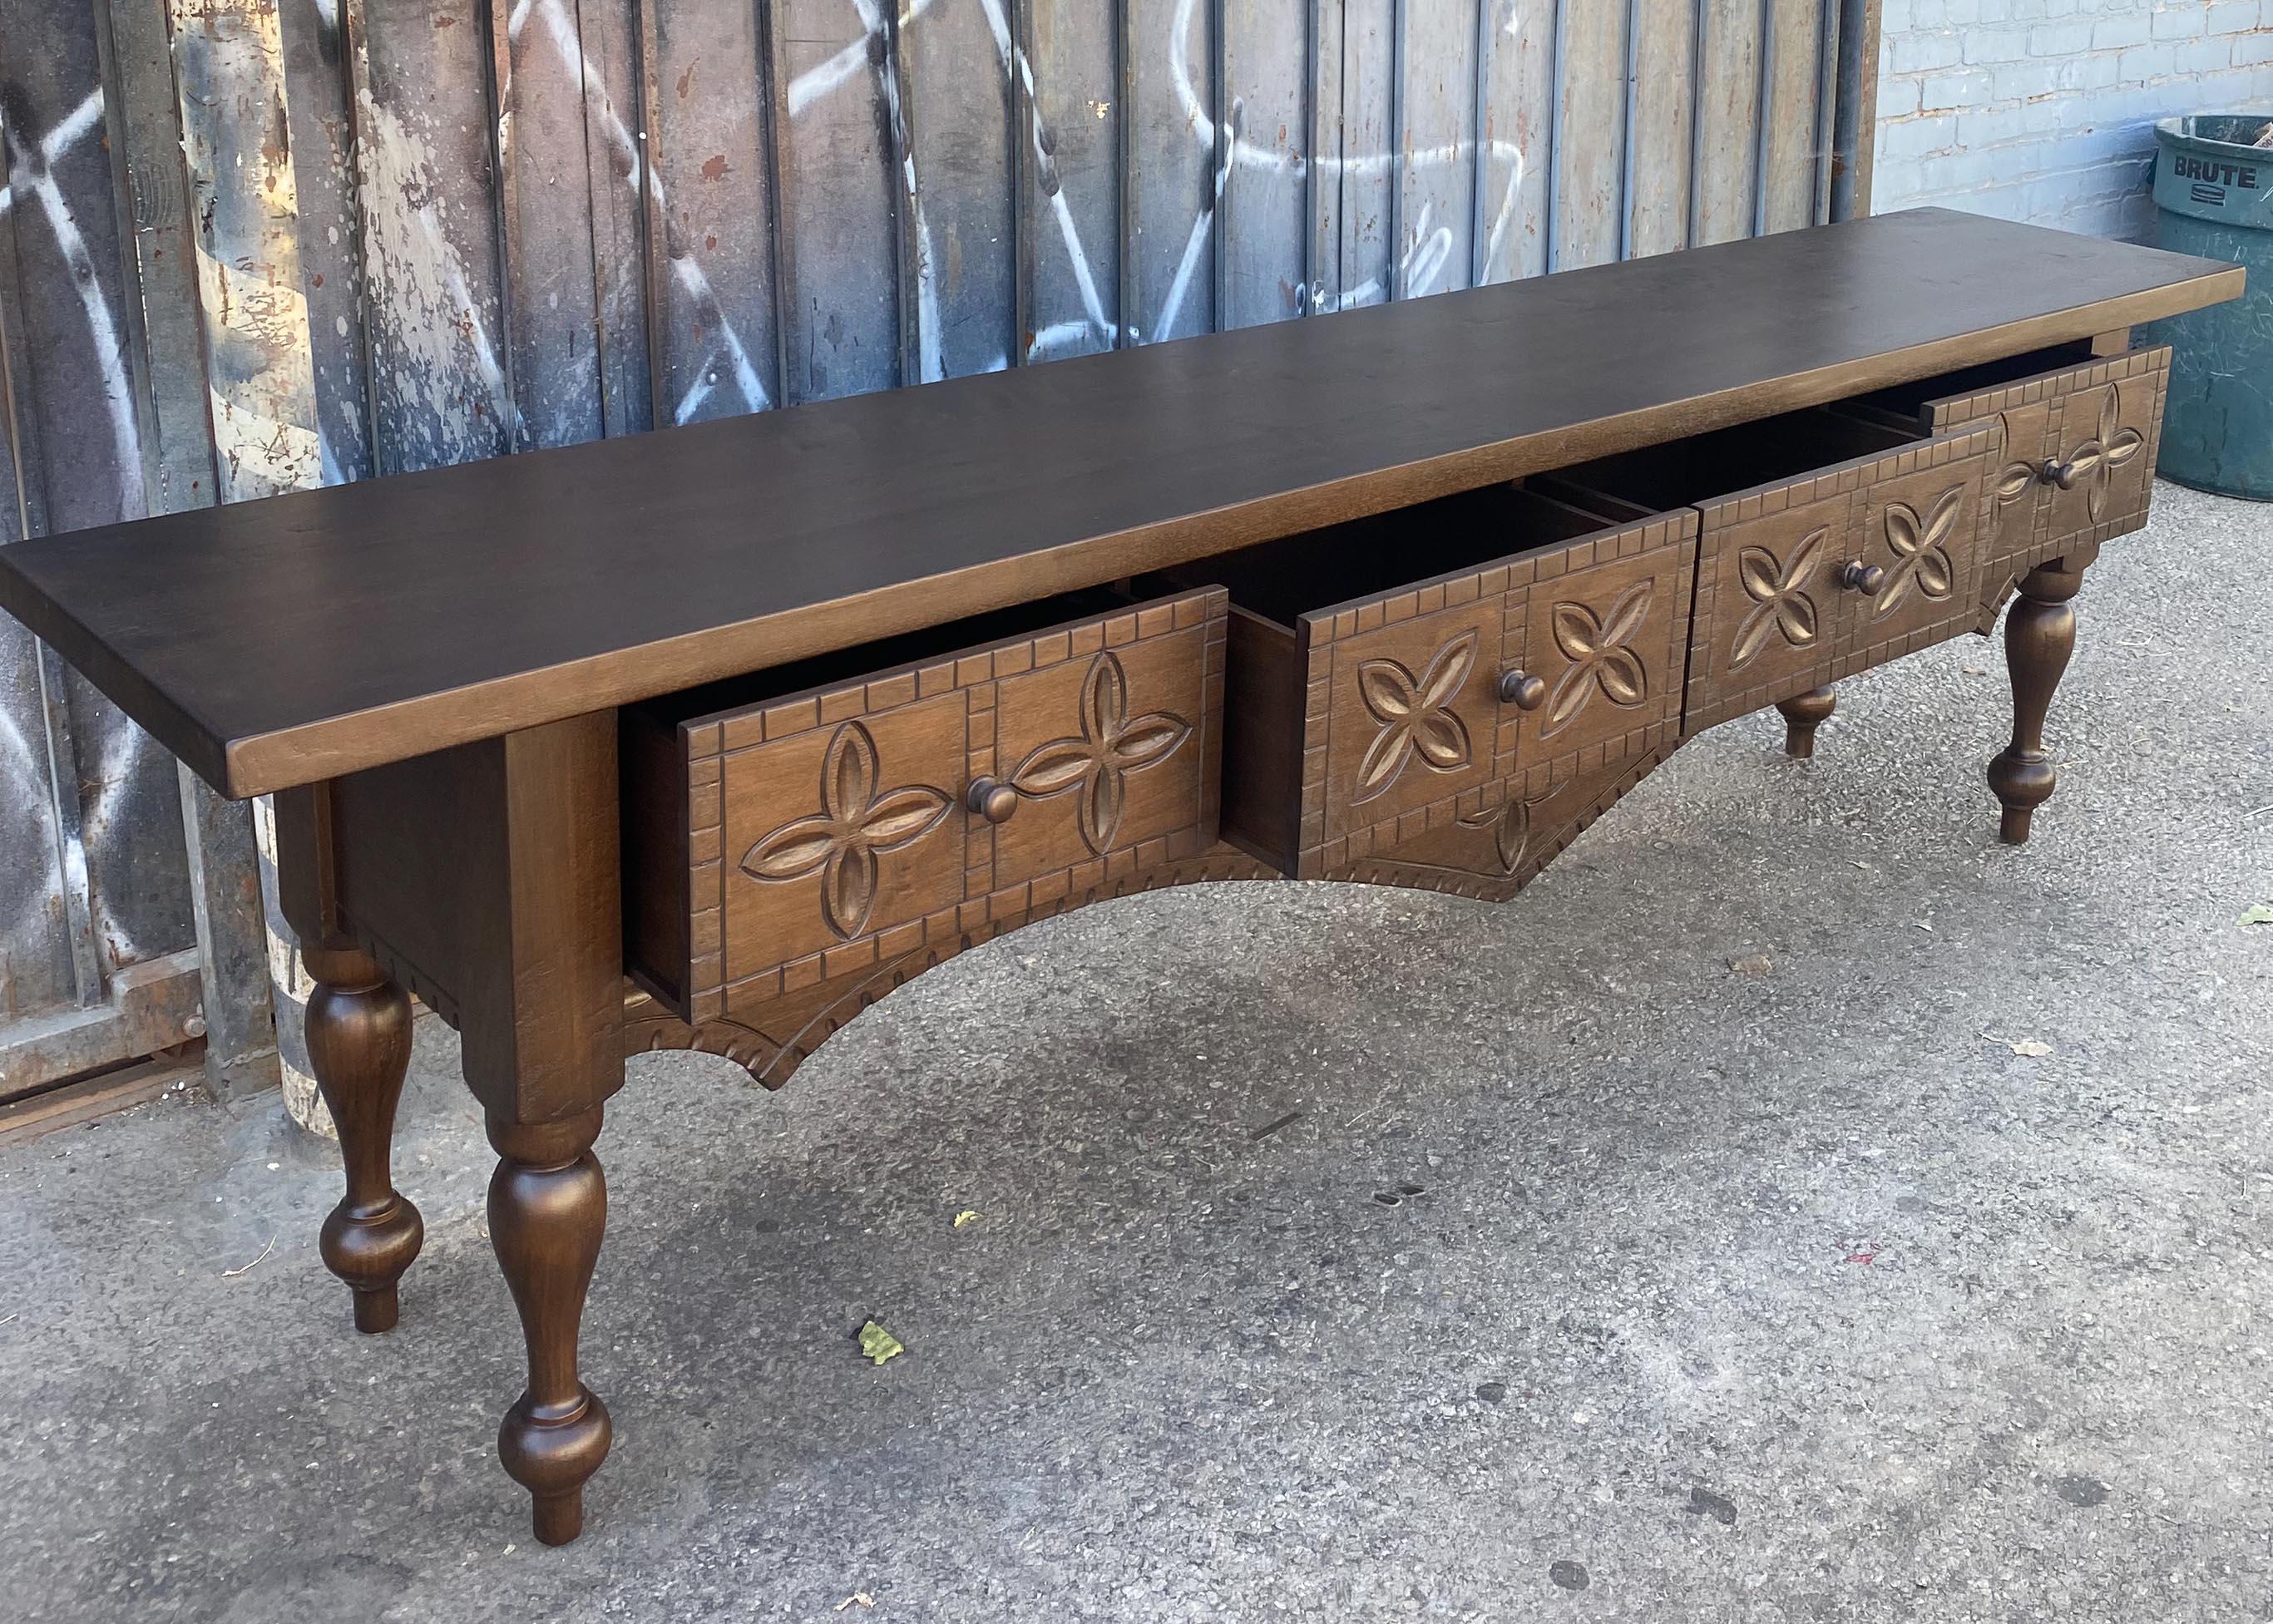 This is our custom carved Nahuala (animal spirit) console, based on traditional Nahuala tables from the highlands of Guatemala.  This can be done in custom sizes and finishes. As shown, in Walnut with our Walnut #3 finish and light distress. Colors